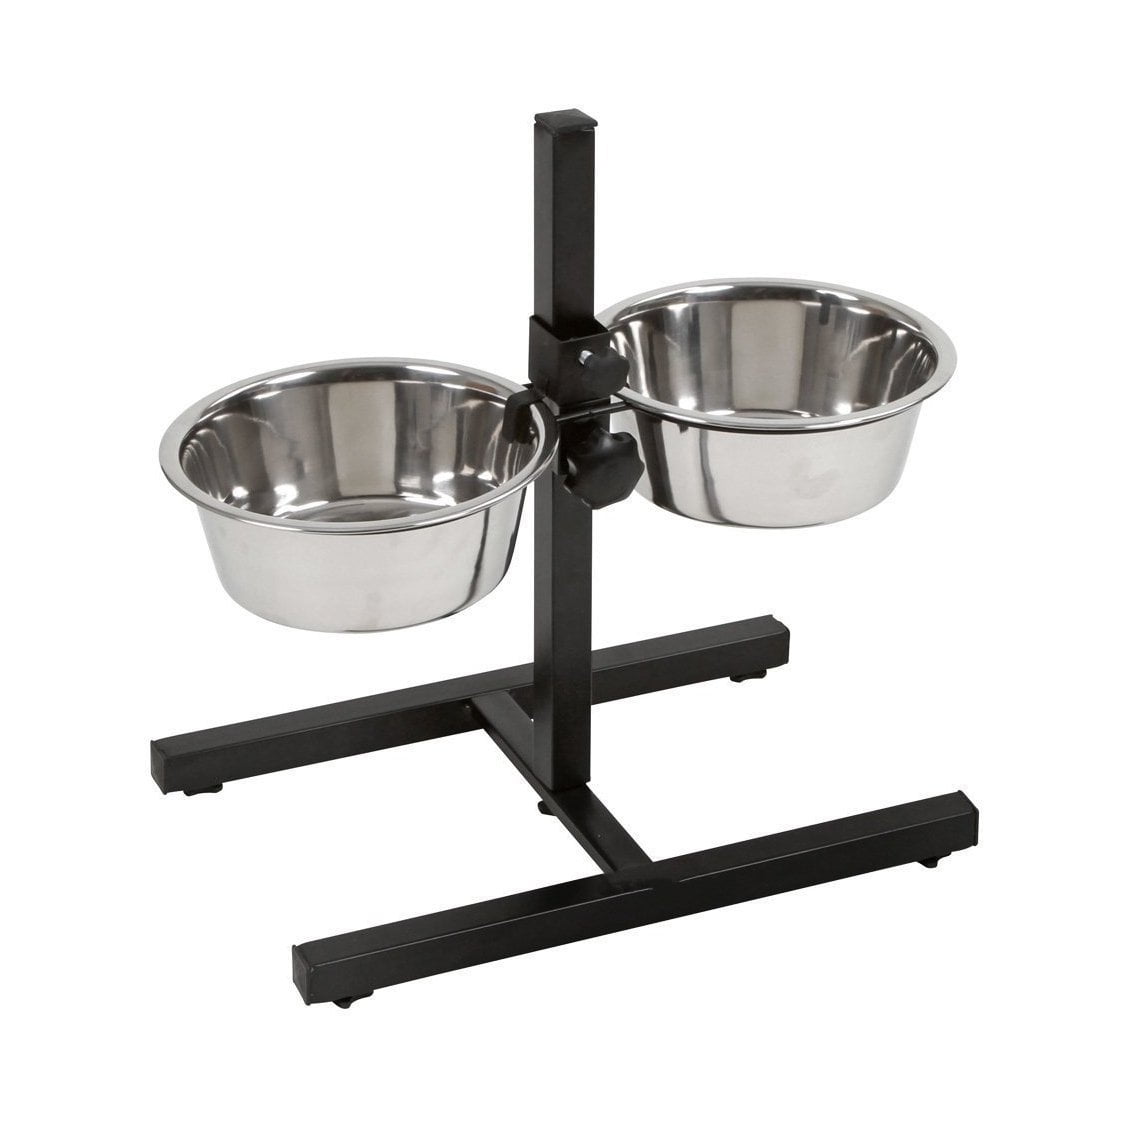 Adjustable Pets Cats/Dogs Dinner Stand Tray Large 2QT ST3327 / EV-1015 (Parcel Rate)